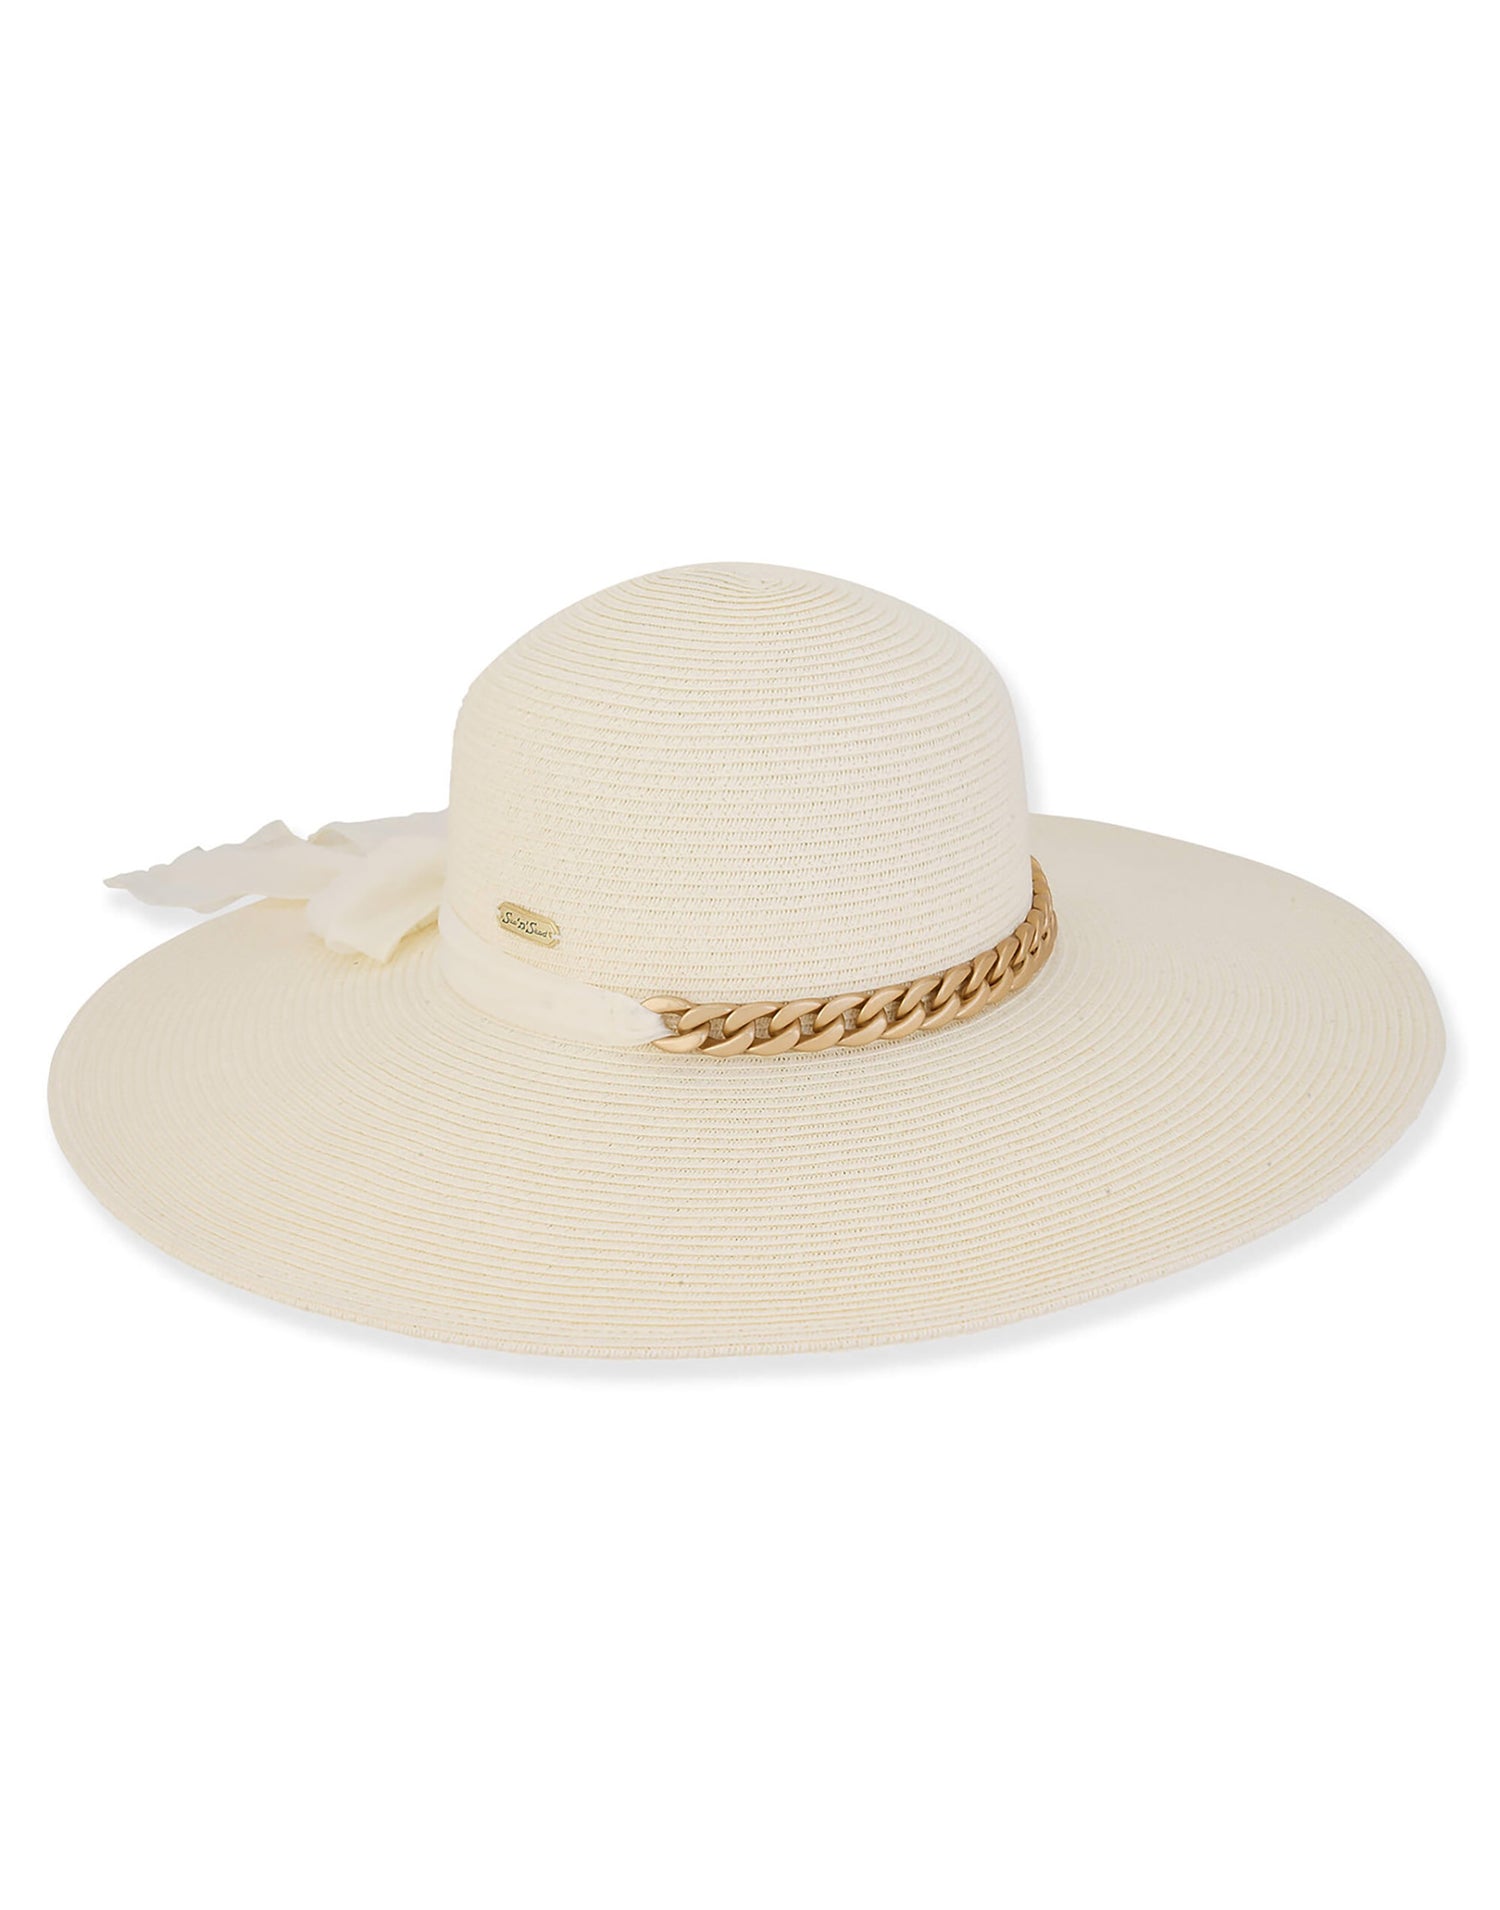 Carina Paper Braid Floppy Hat by Sun N Sand in Ivory - Angled View